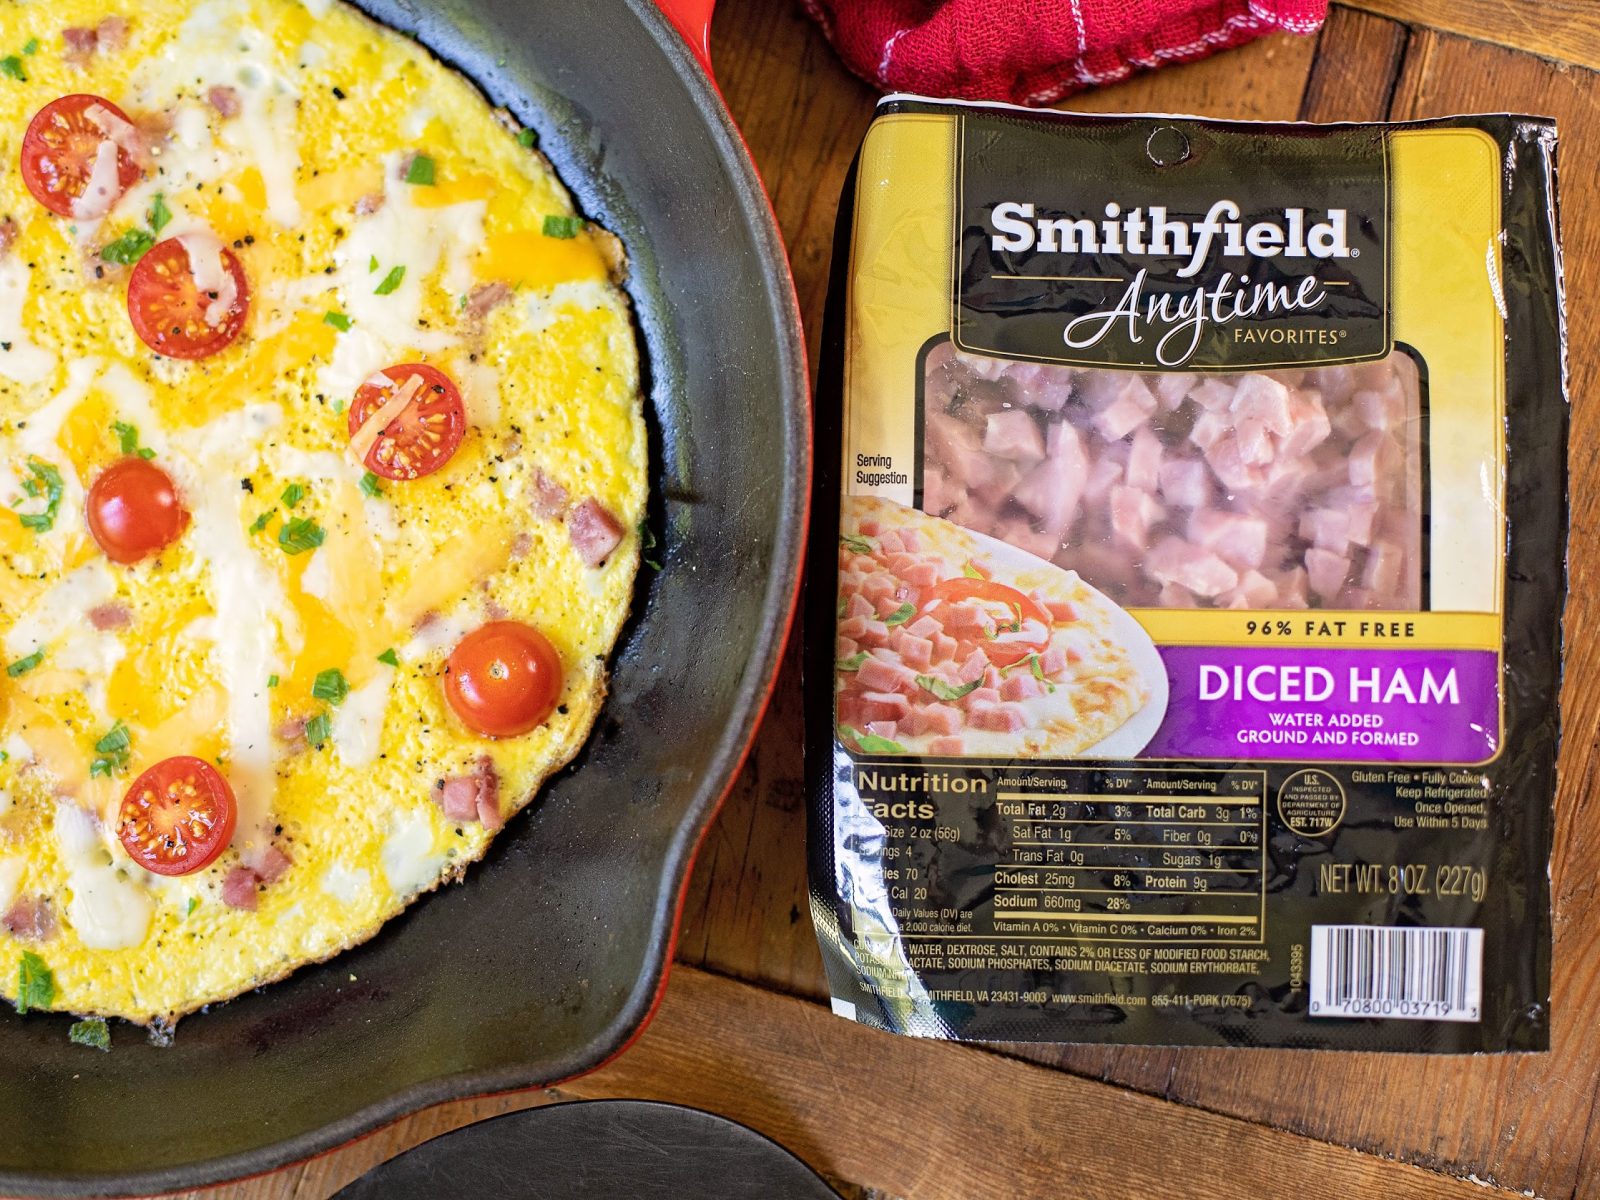 Great Week To Grab Deal On Smithfield Diced Ham, Cubed Ham or Ham Steaks This Week At Publix – As Low As A Buck!